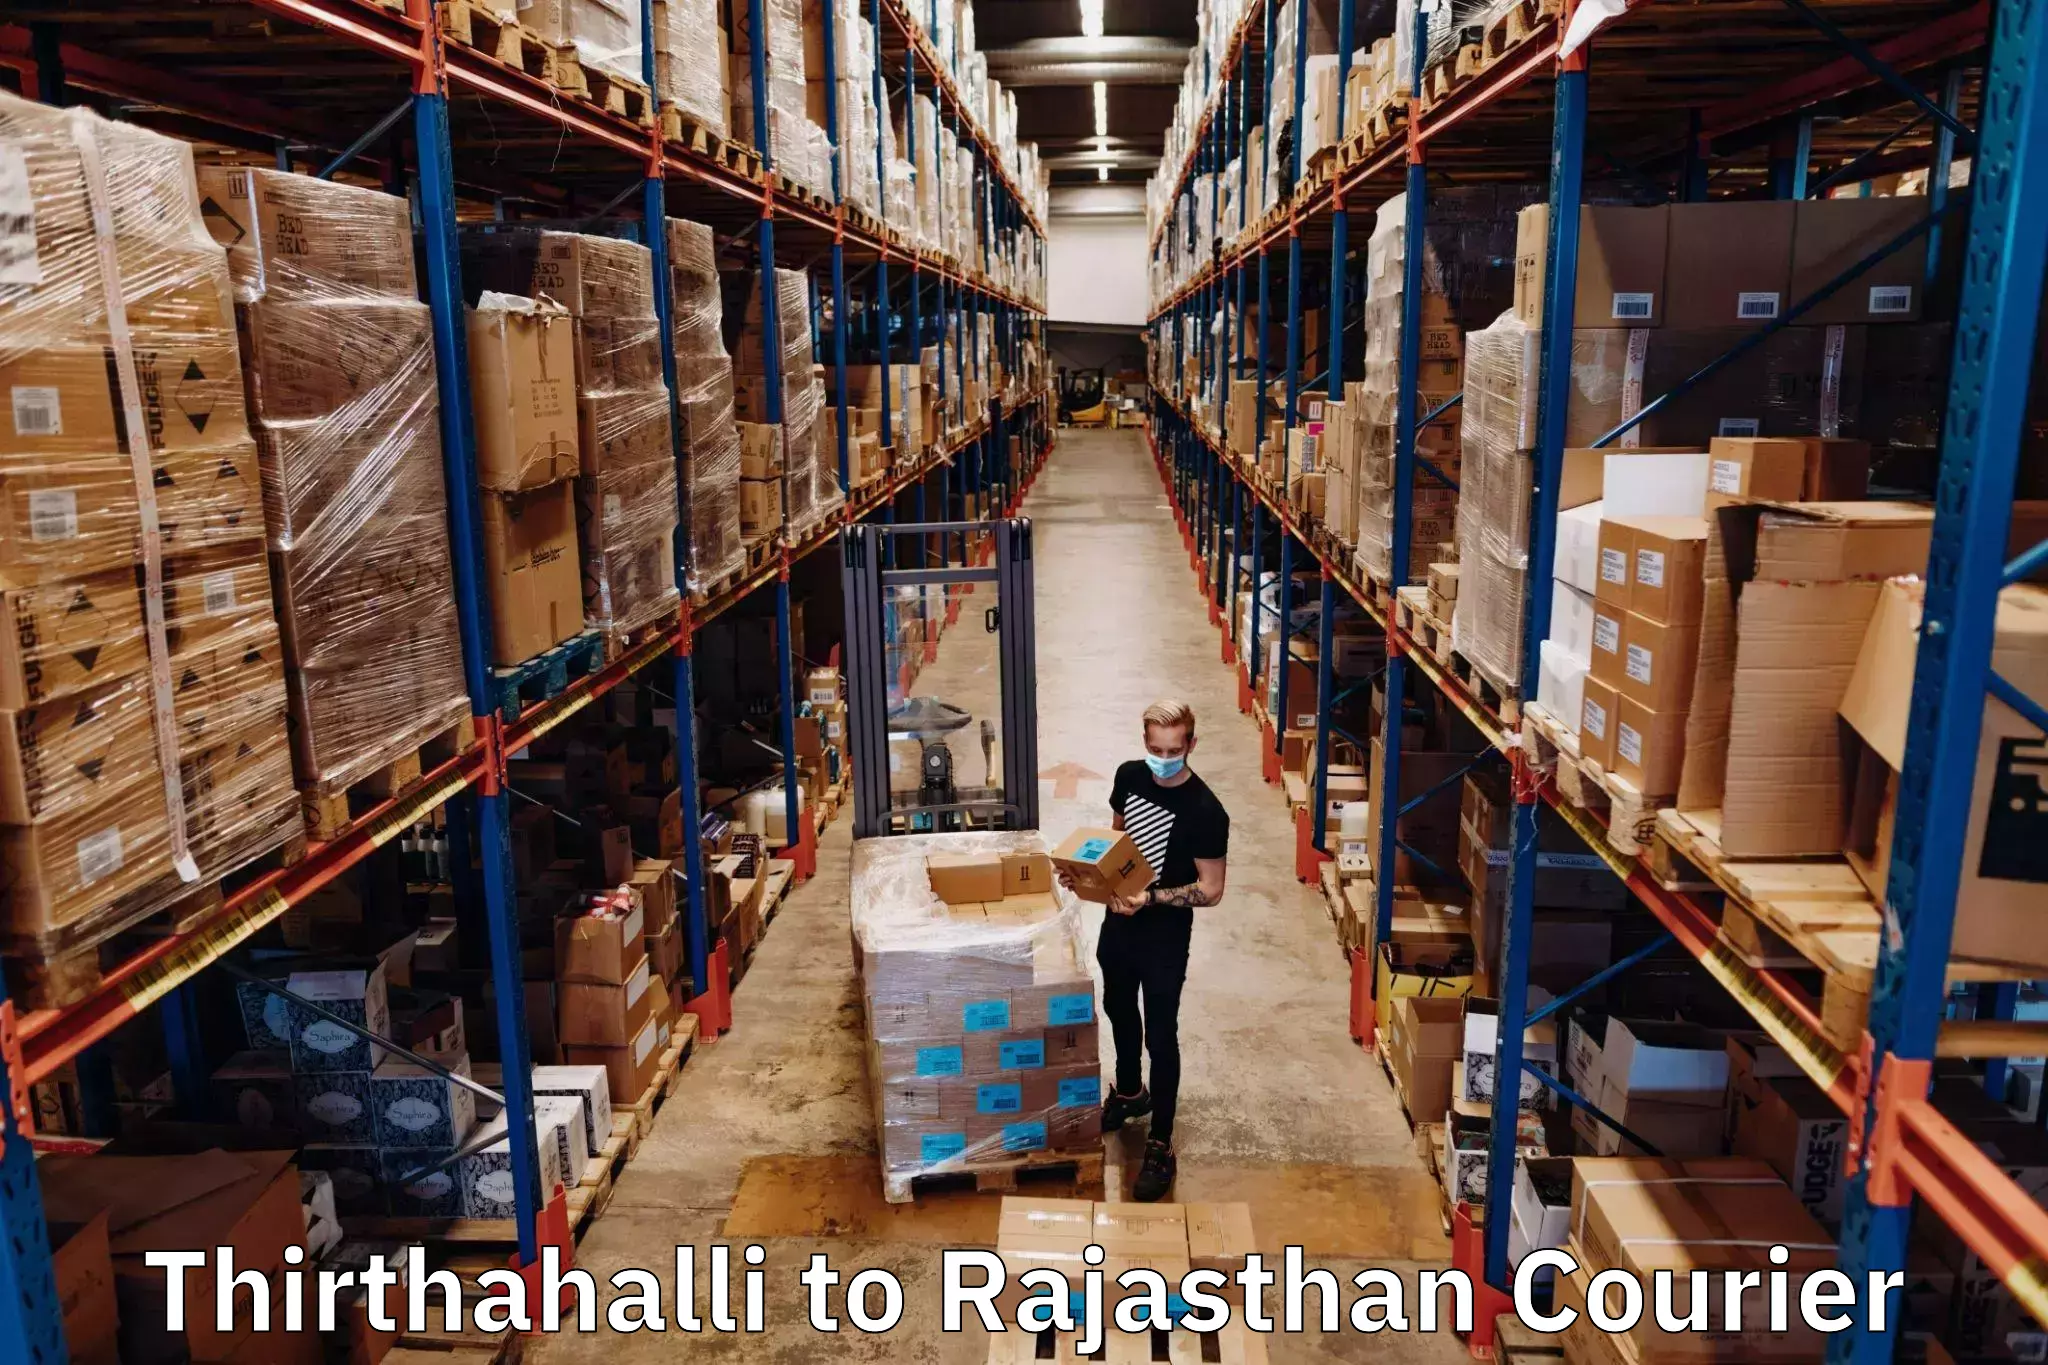 Delivery service partnership Thirthahalli to Rajasthan